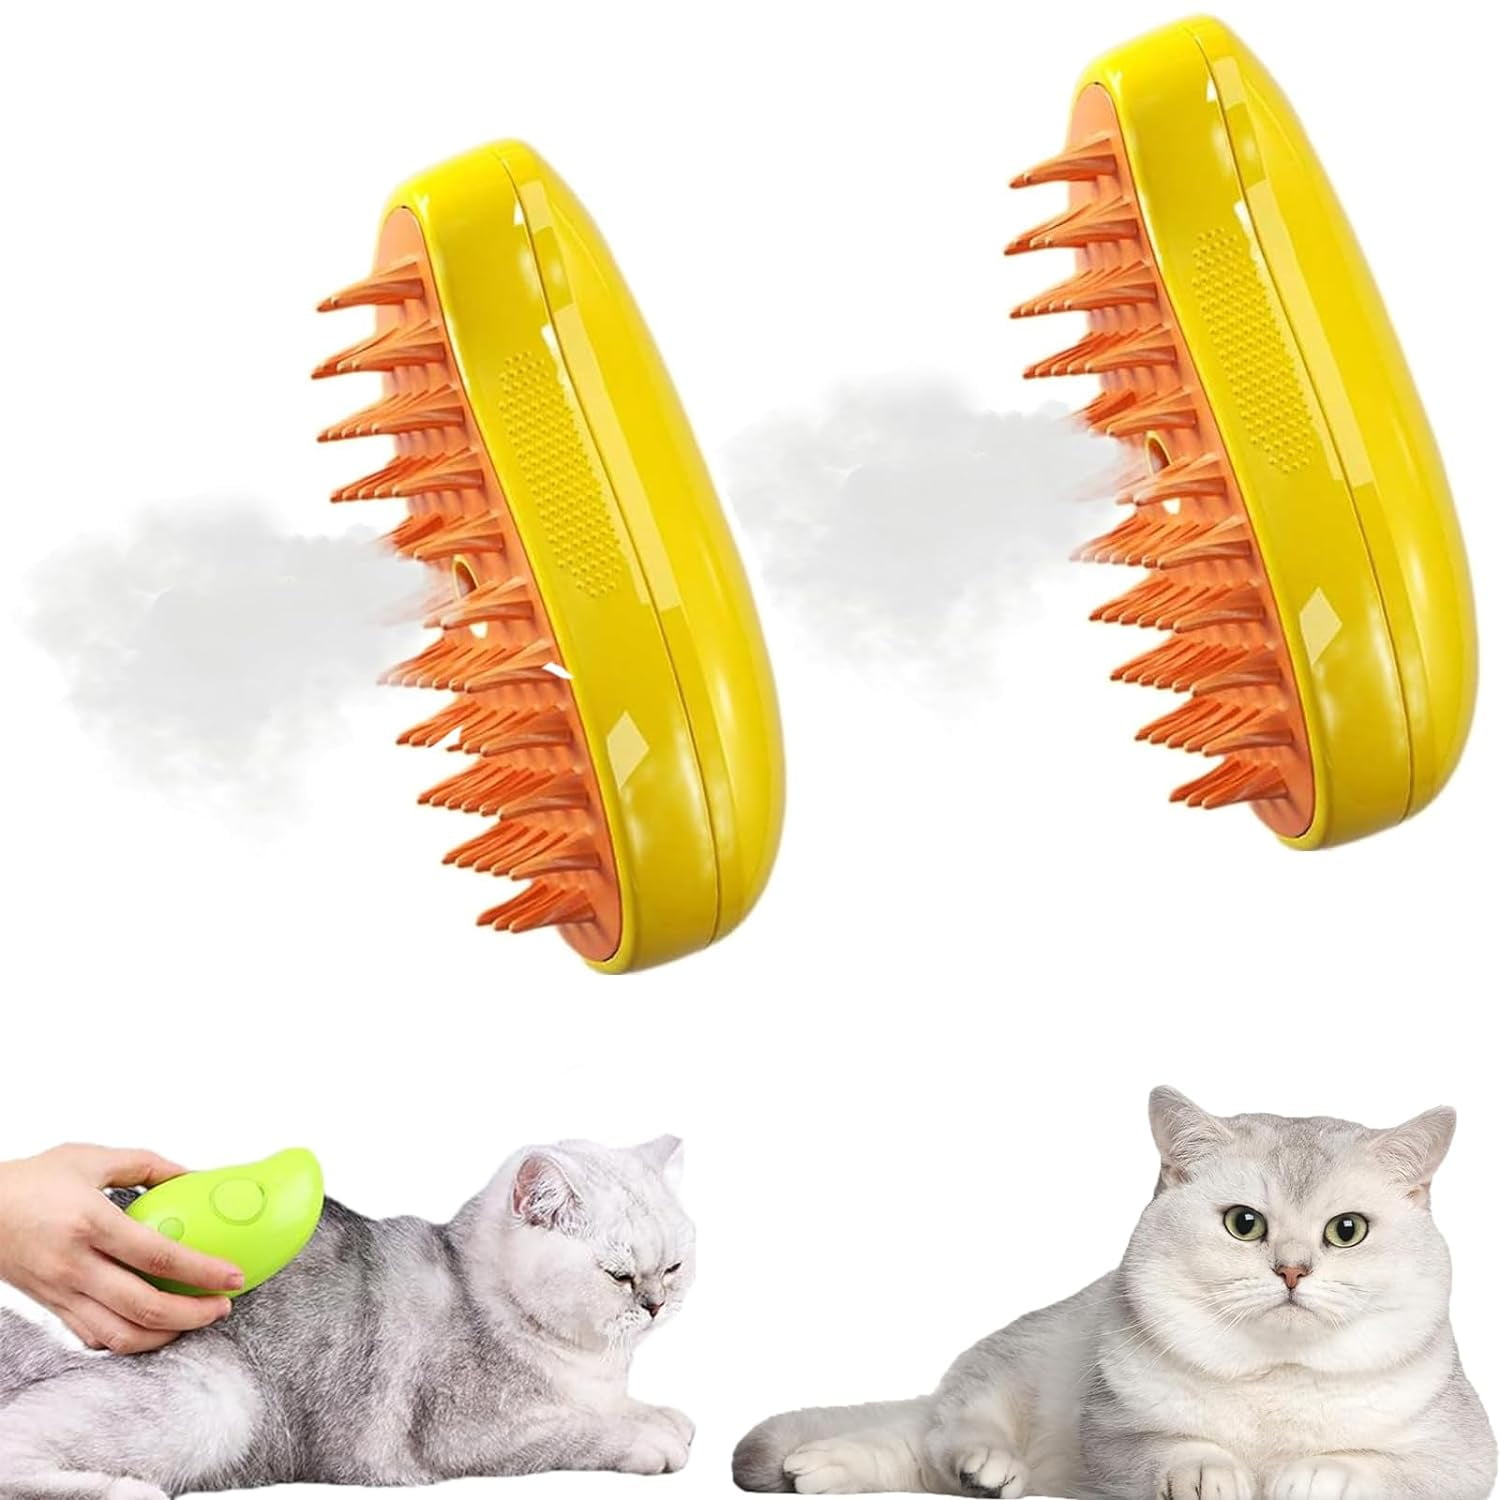 RUOPAN Steamy Cat Brush - 3 In1 Cat Steamy Brush, Self Cleaning Steam Cat  Brush, Cat Steamer Brush for Massage, Cat Hair Brush for Removing Tangled